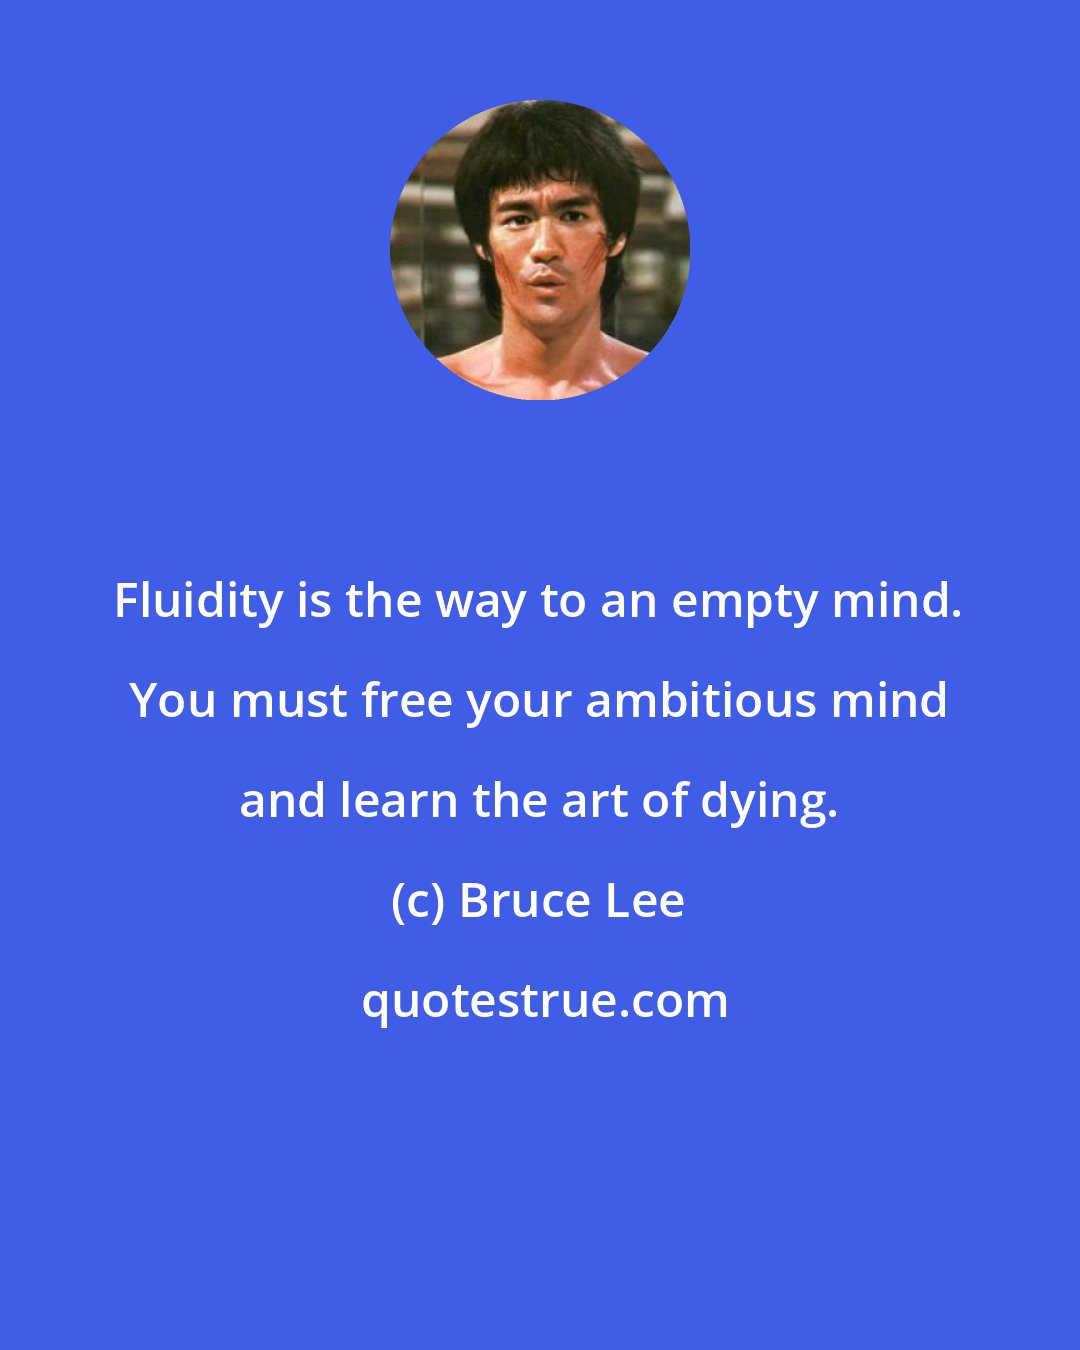 Bruce Lee: Fluidity is the way to an empty mind. You must free your ambitious mind and learn the art of dying.